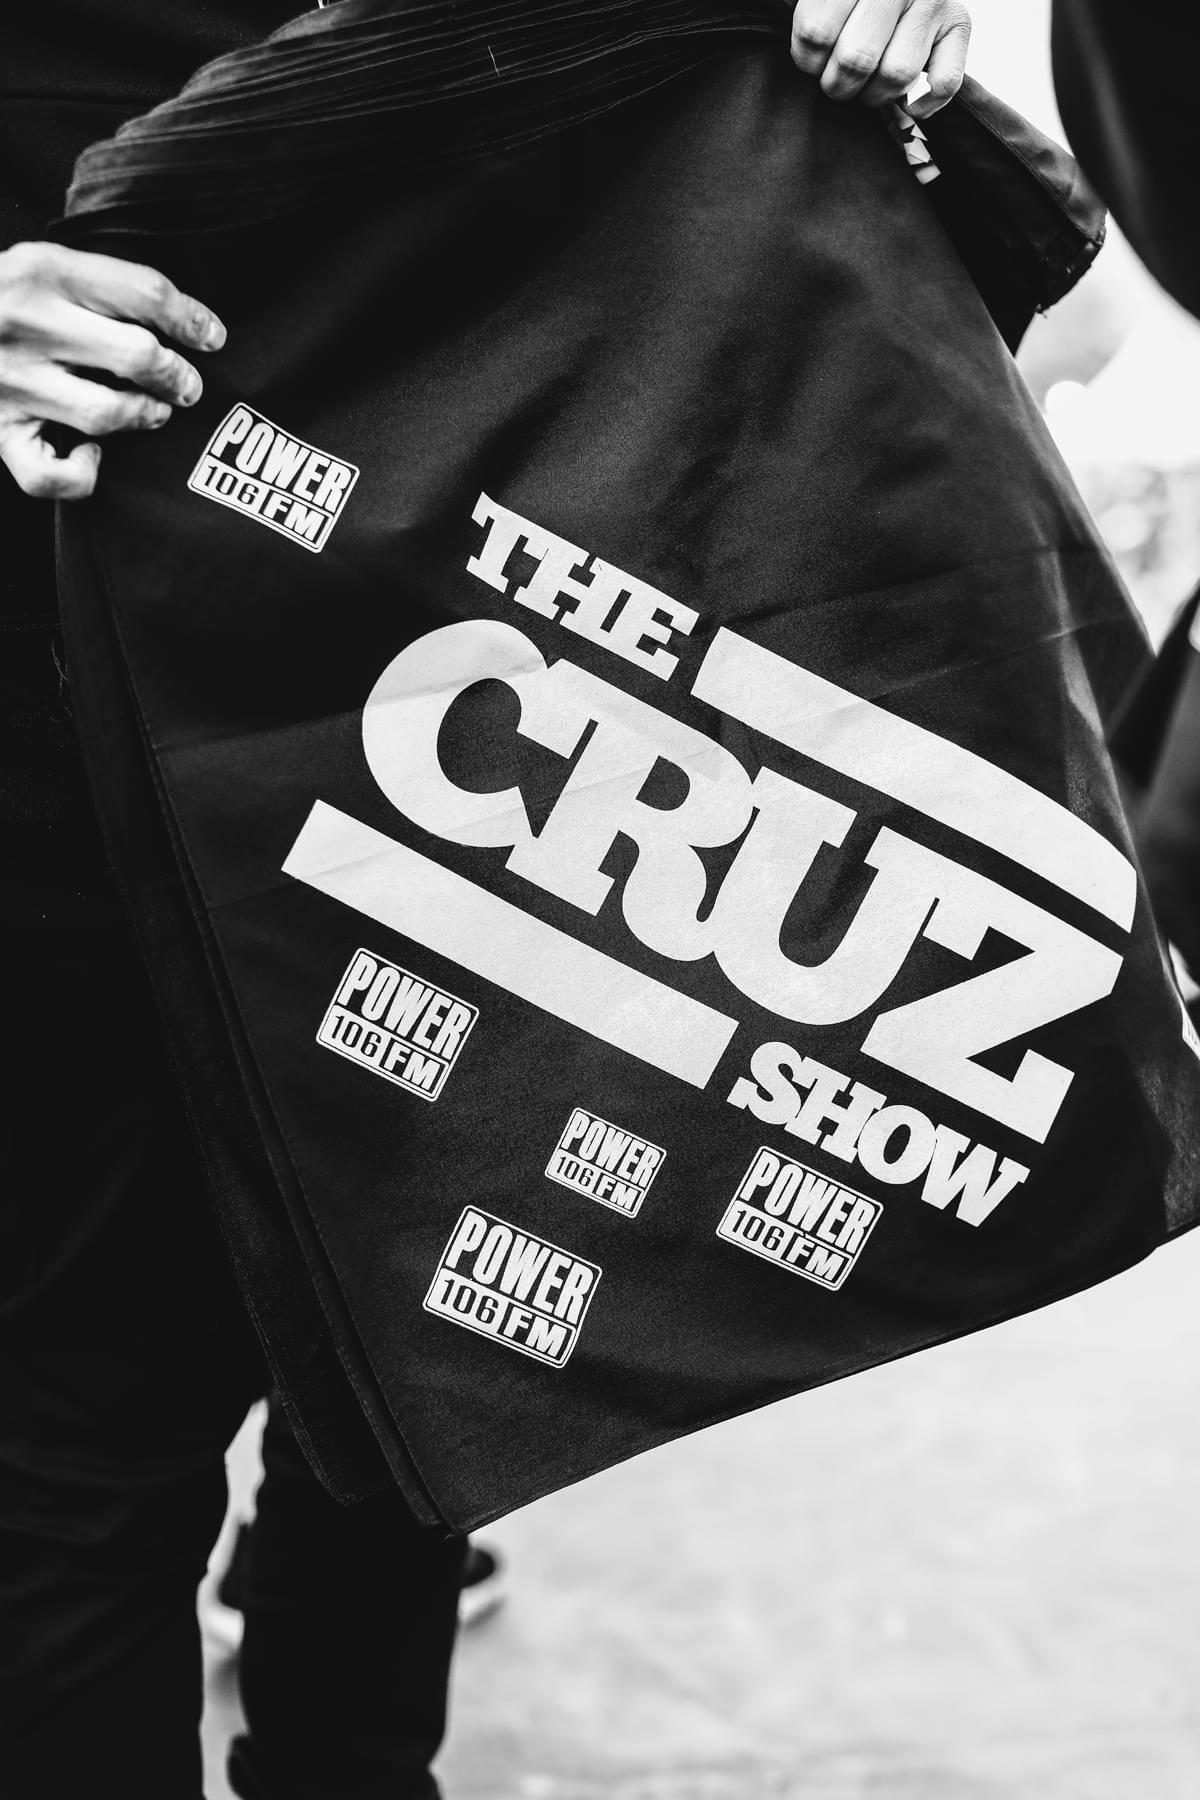 Cruz Talks Family Ruining Your Dreams, Callers Share Crazy EX Stories, Are You Down + MORE!